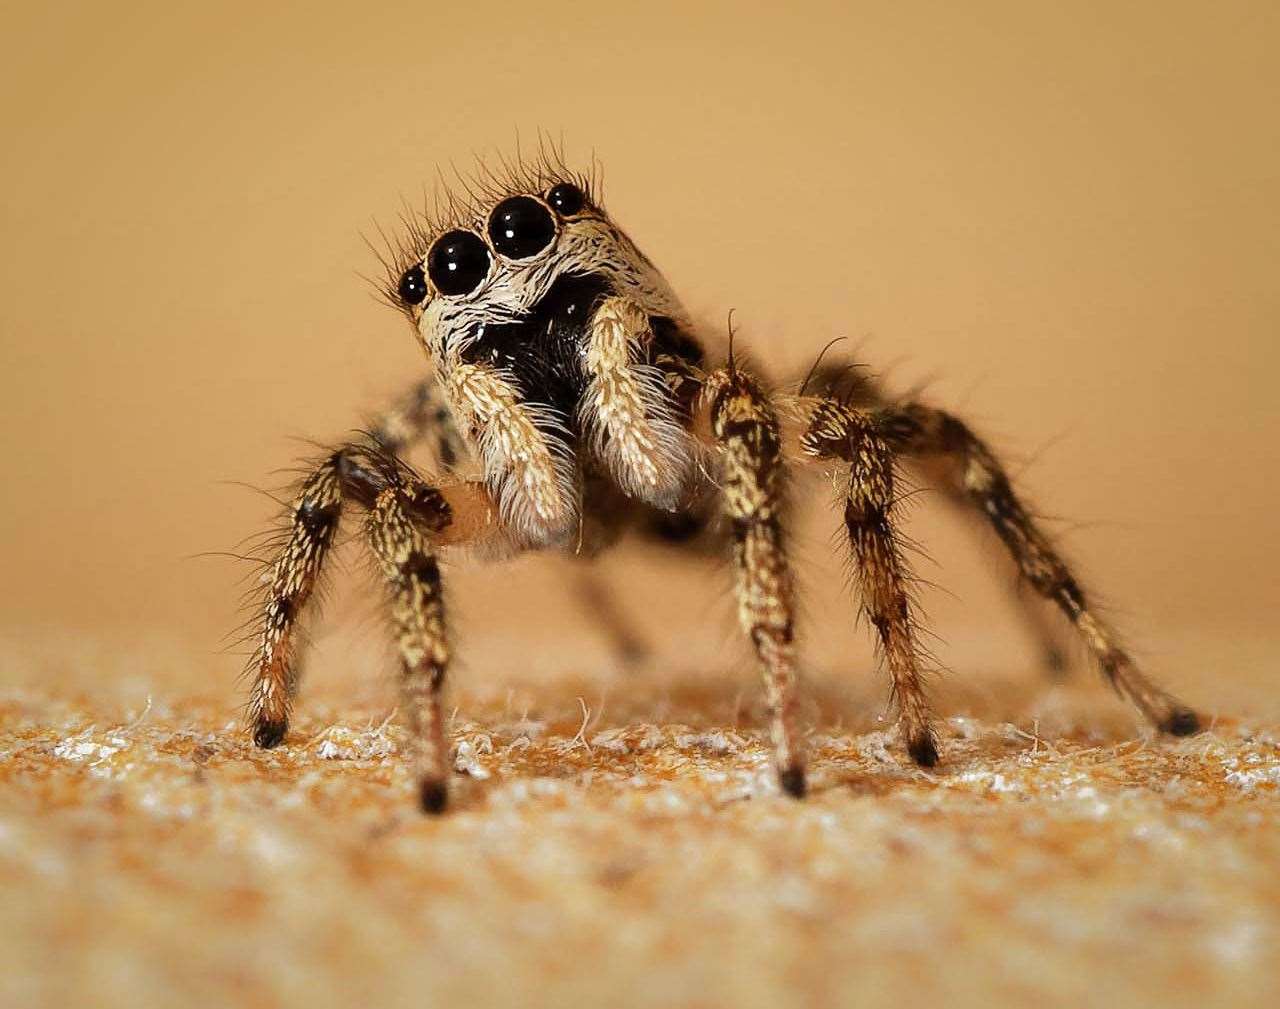 The Swanscombe Peninsula is home to a critically endangered species of rare jumping spider. Photo: Ray Watson